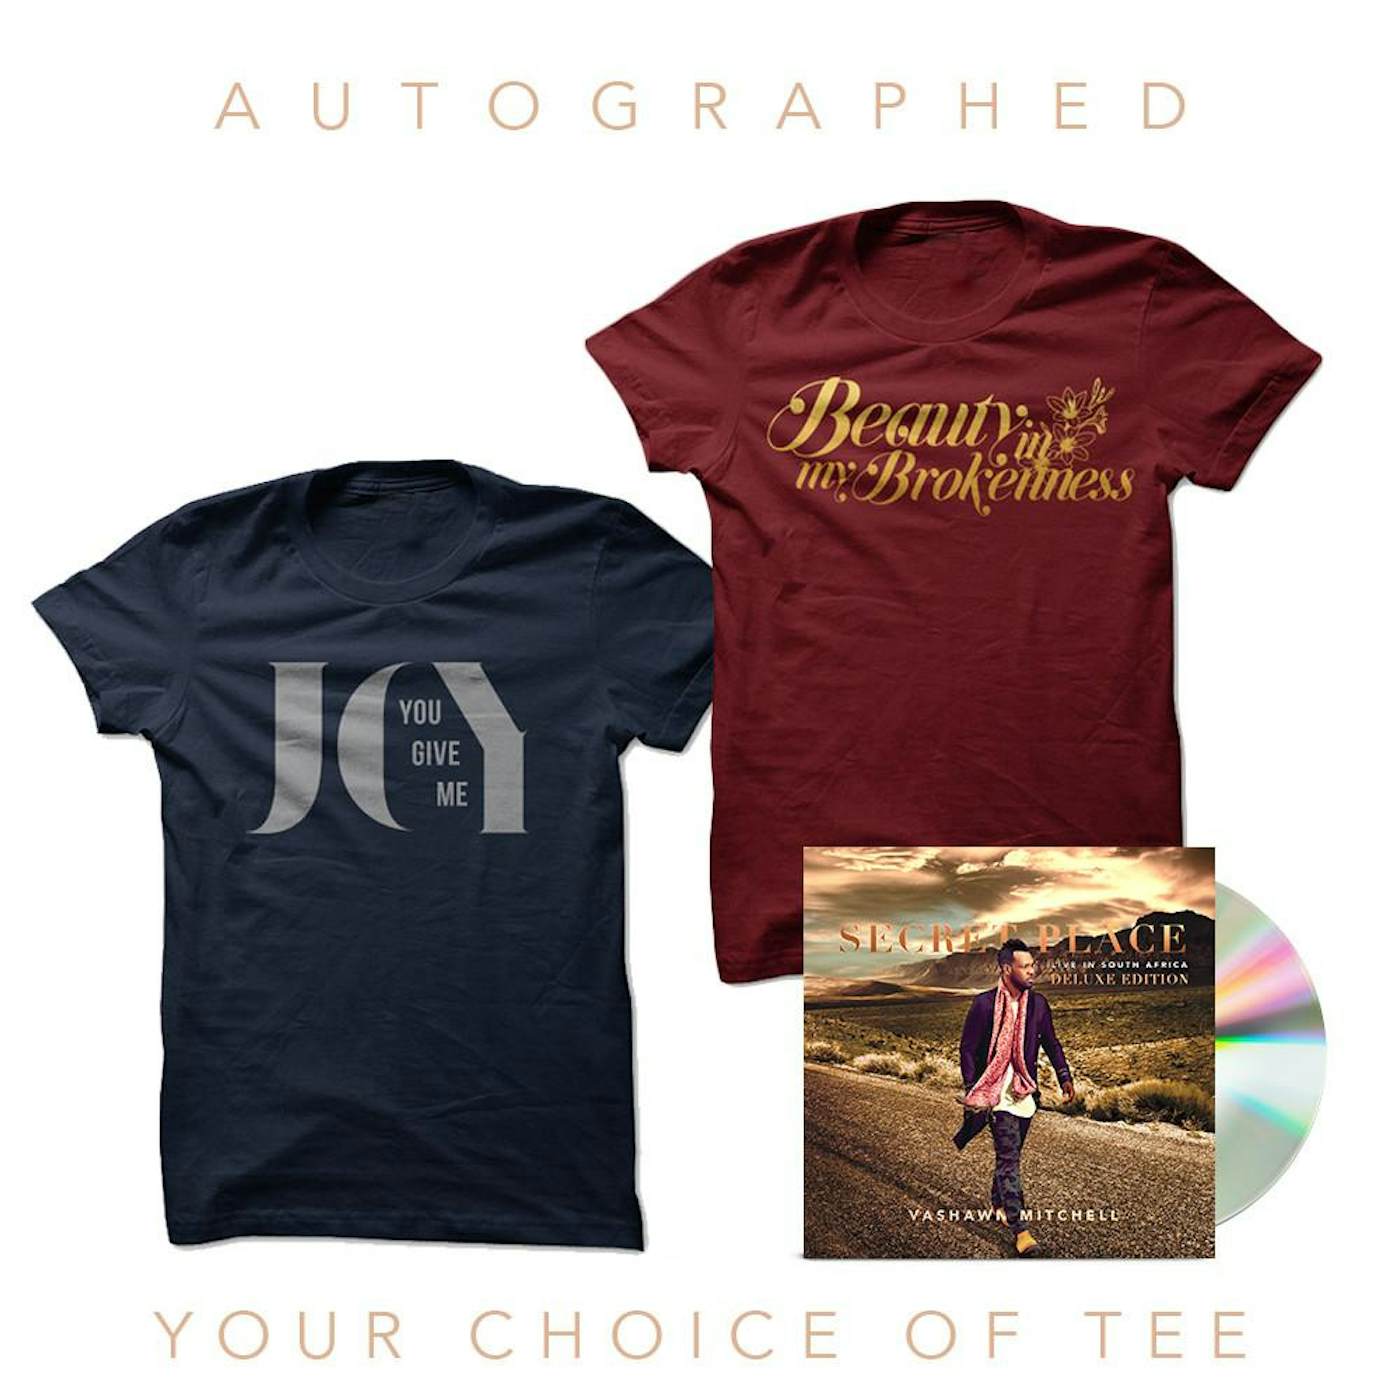 VaShawn Mitchell Autographed Deluxe CD + Your Choice Of Tee